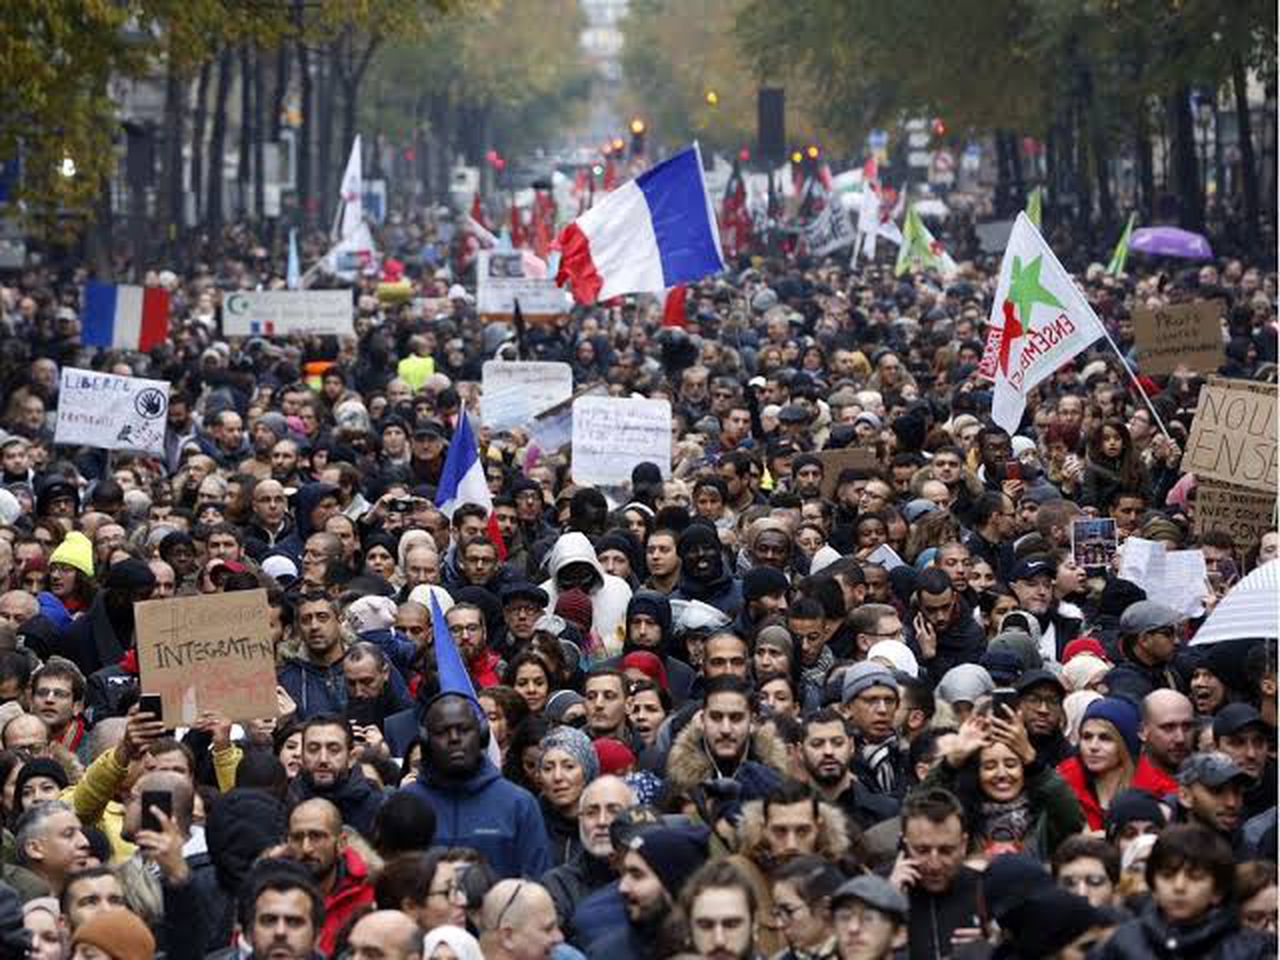 The demonstration received backing from a number of Muslim groups, image via Thibault Camus